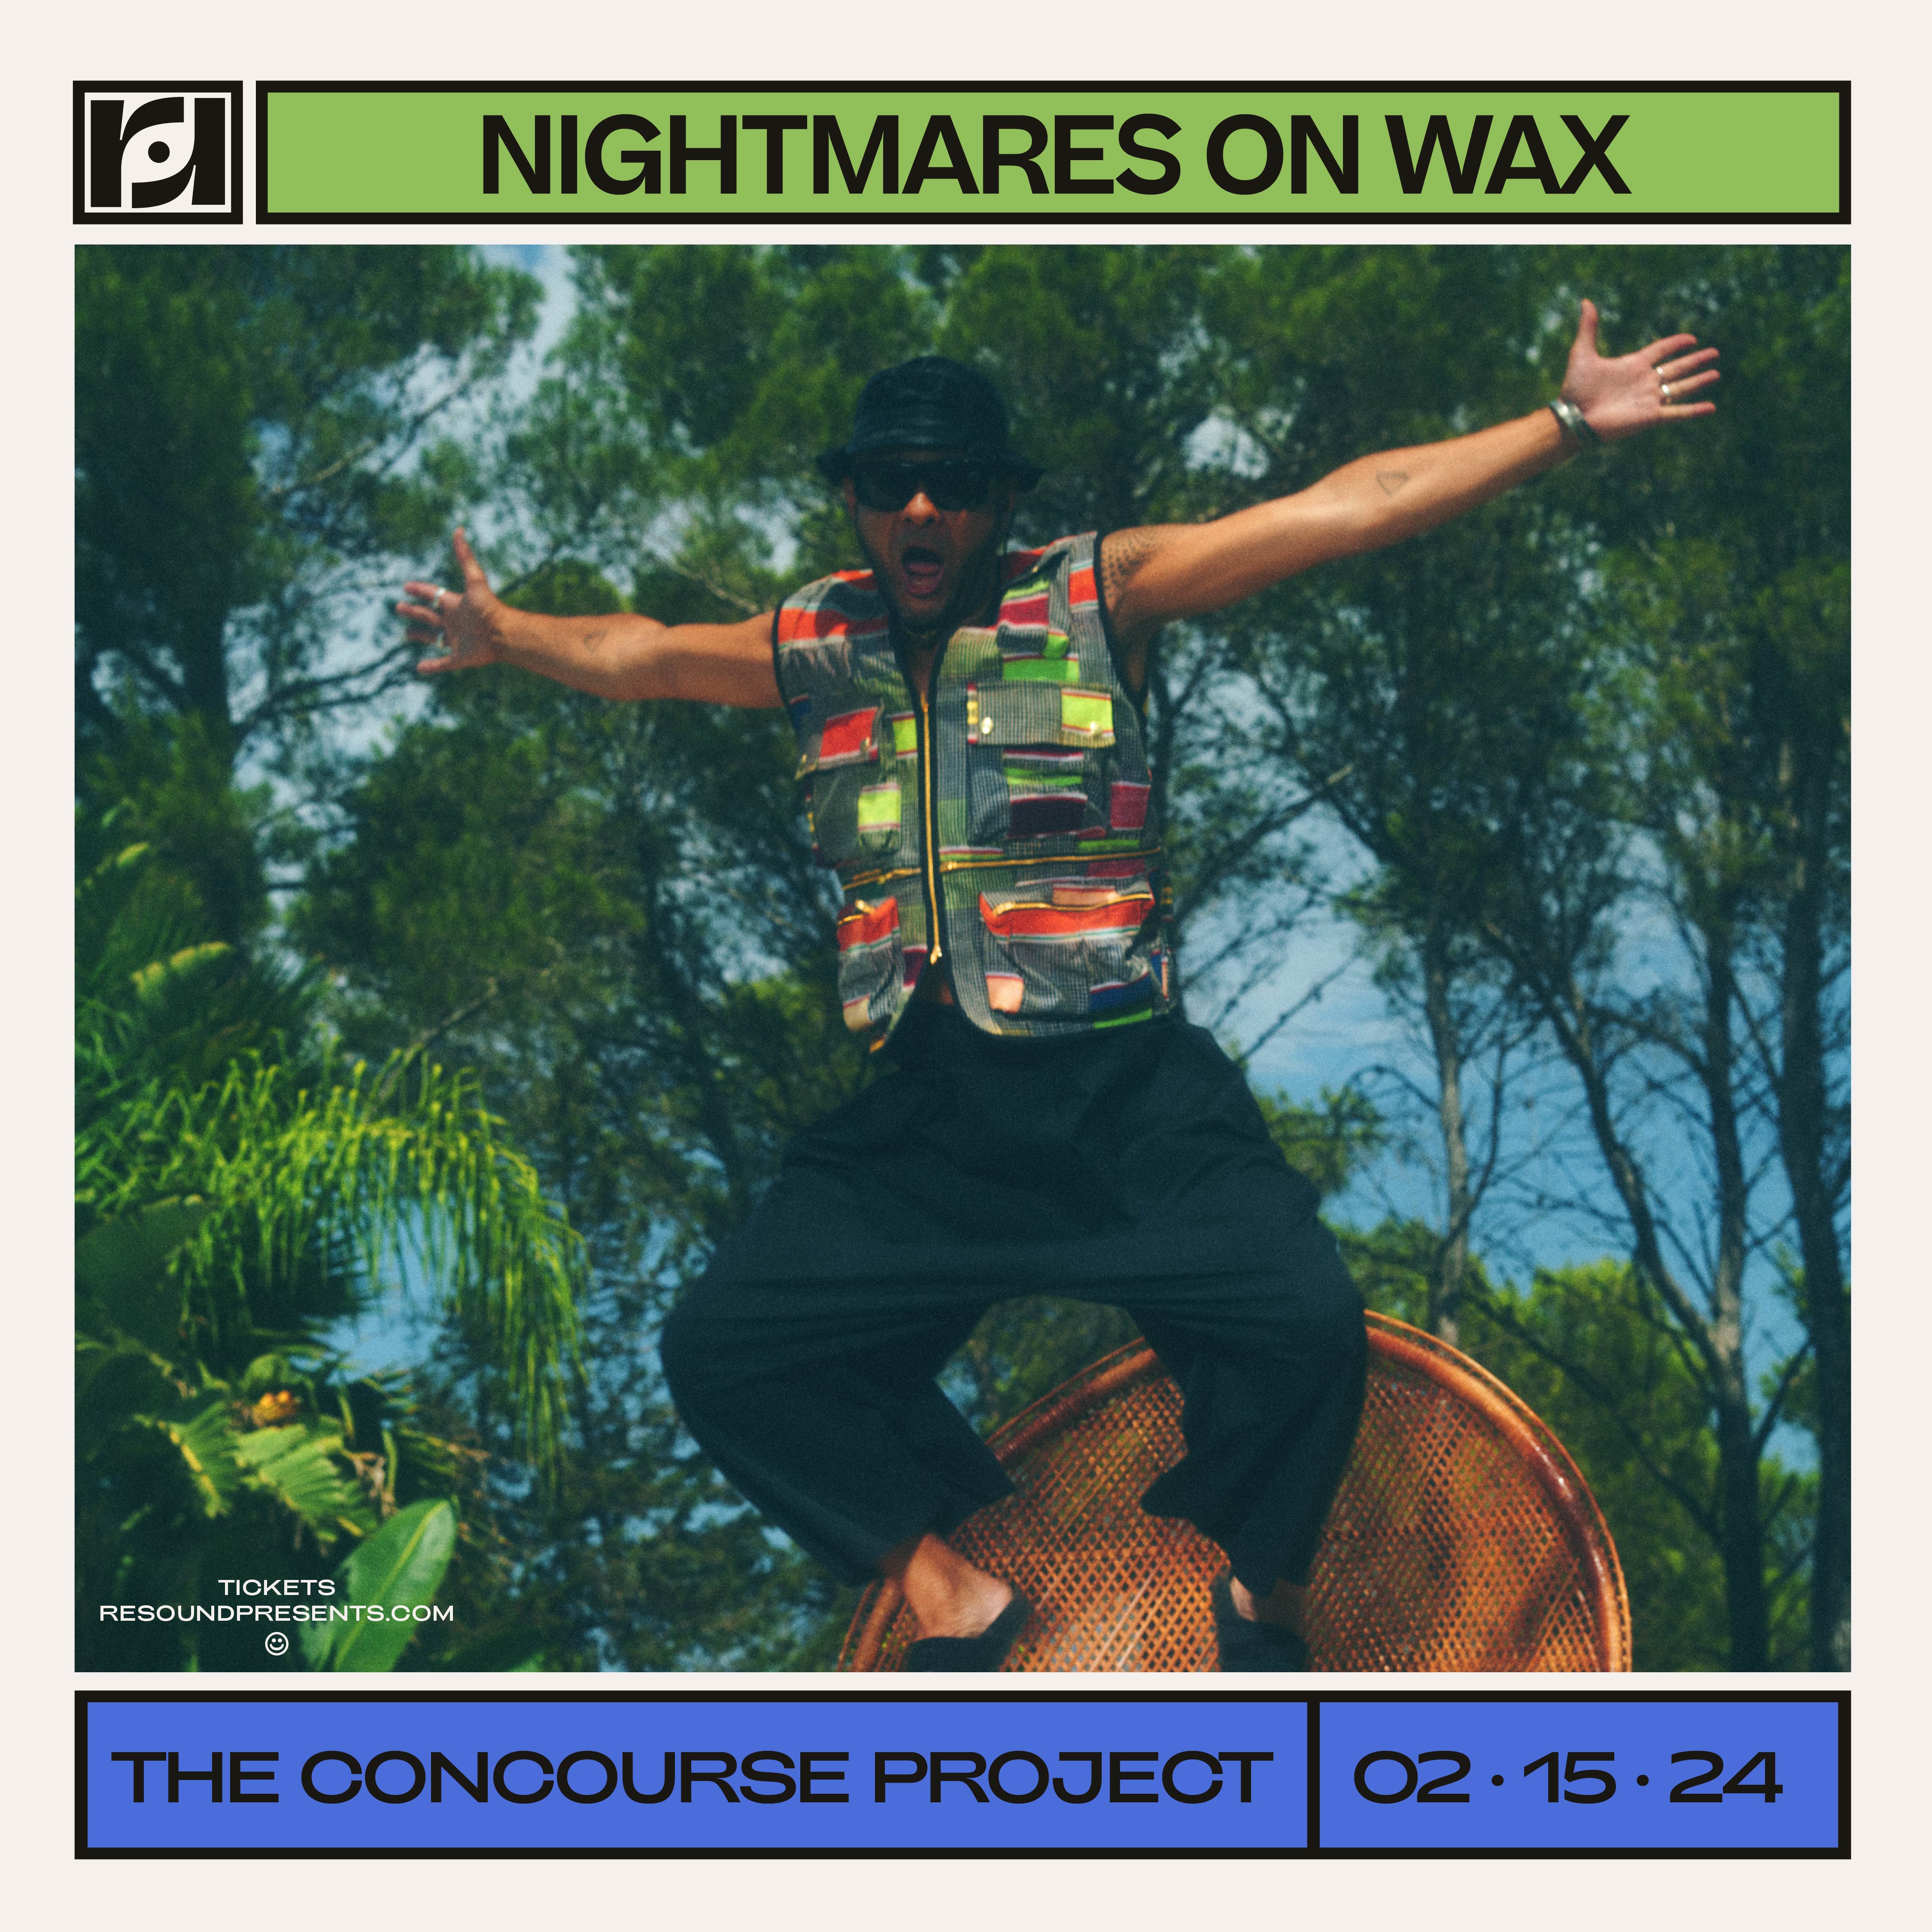 Nightmares on Wax at The Concourse Project